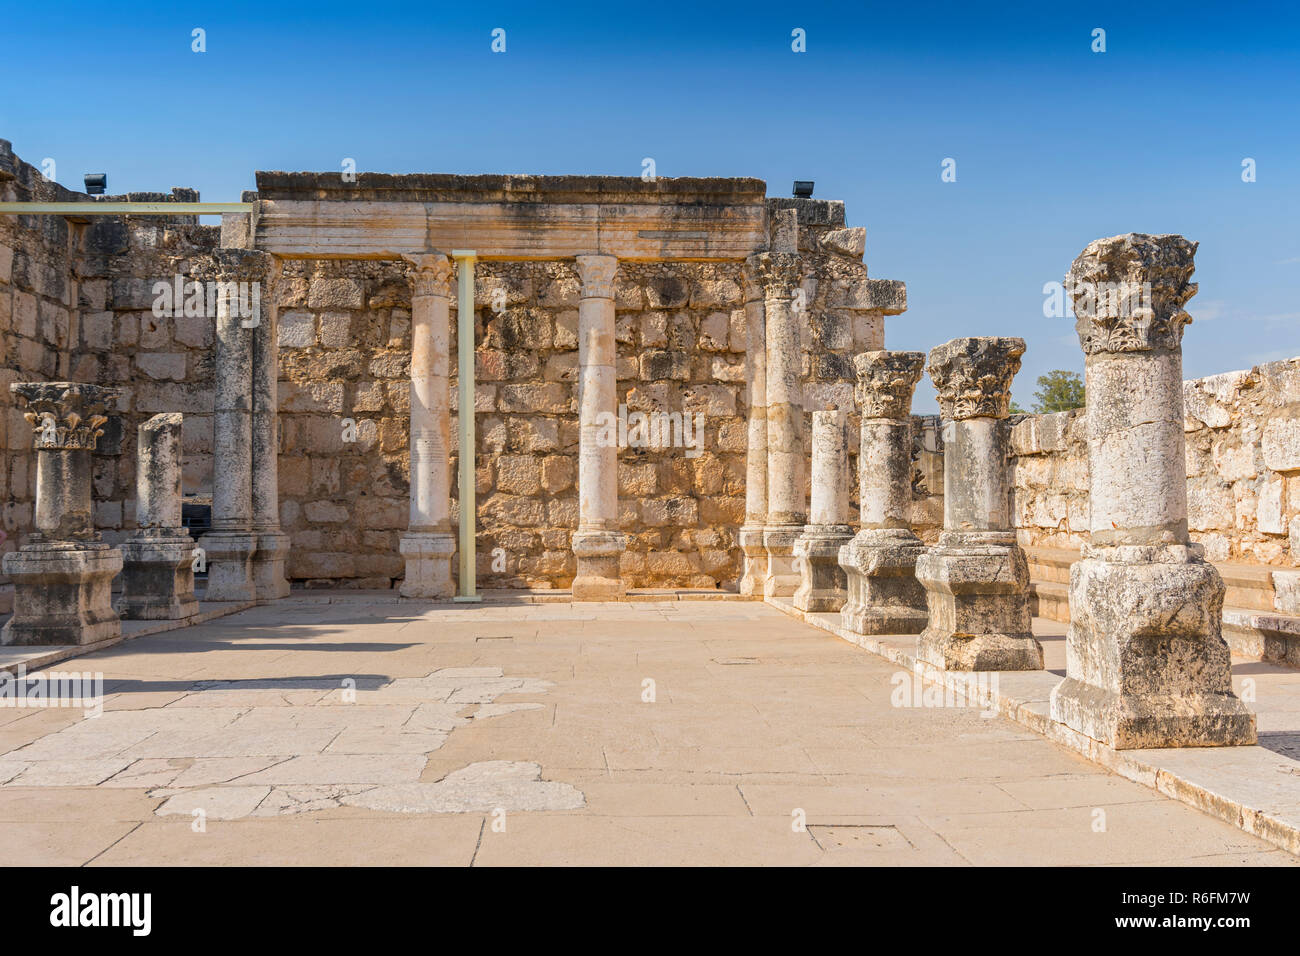 Ruins Of The Old Synagogue In Capernaum By The Sea Of Galilee, Israel Stock Photo